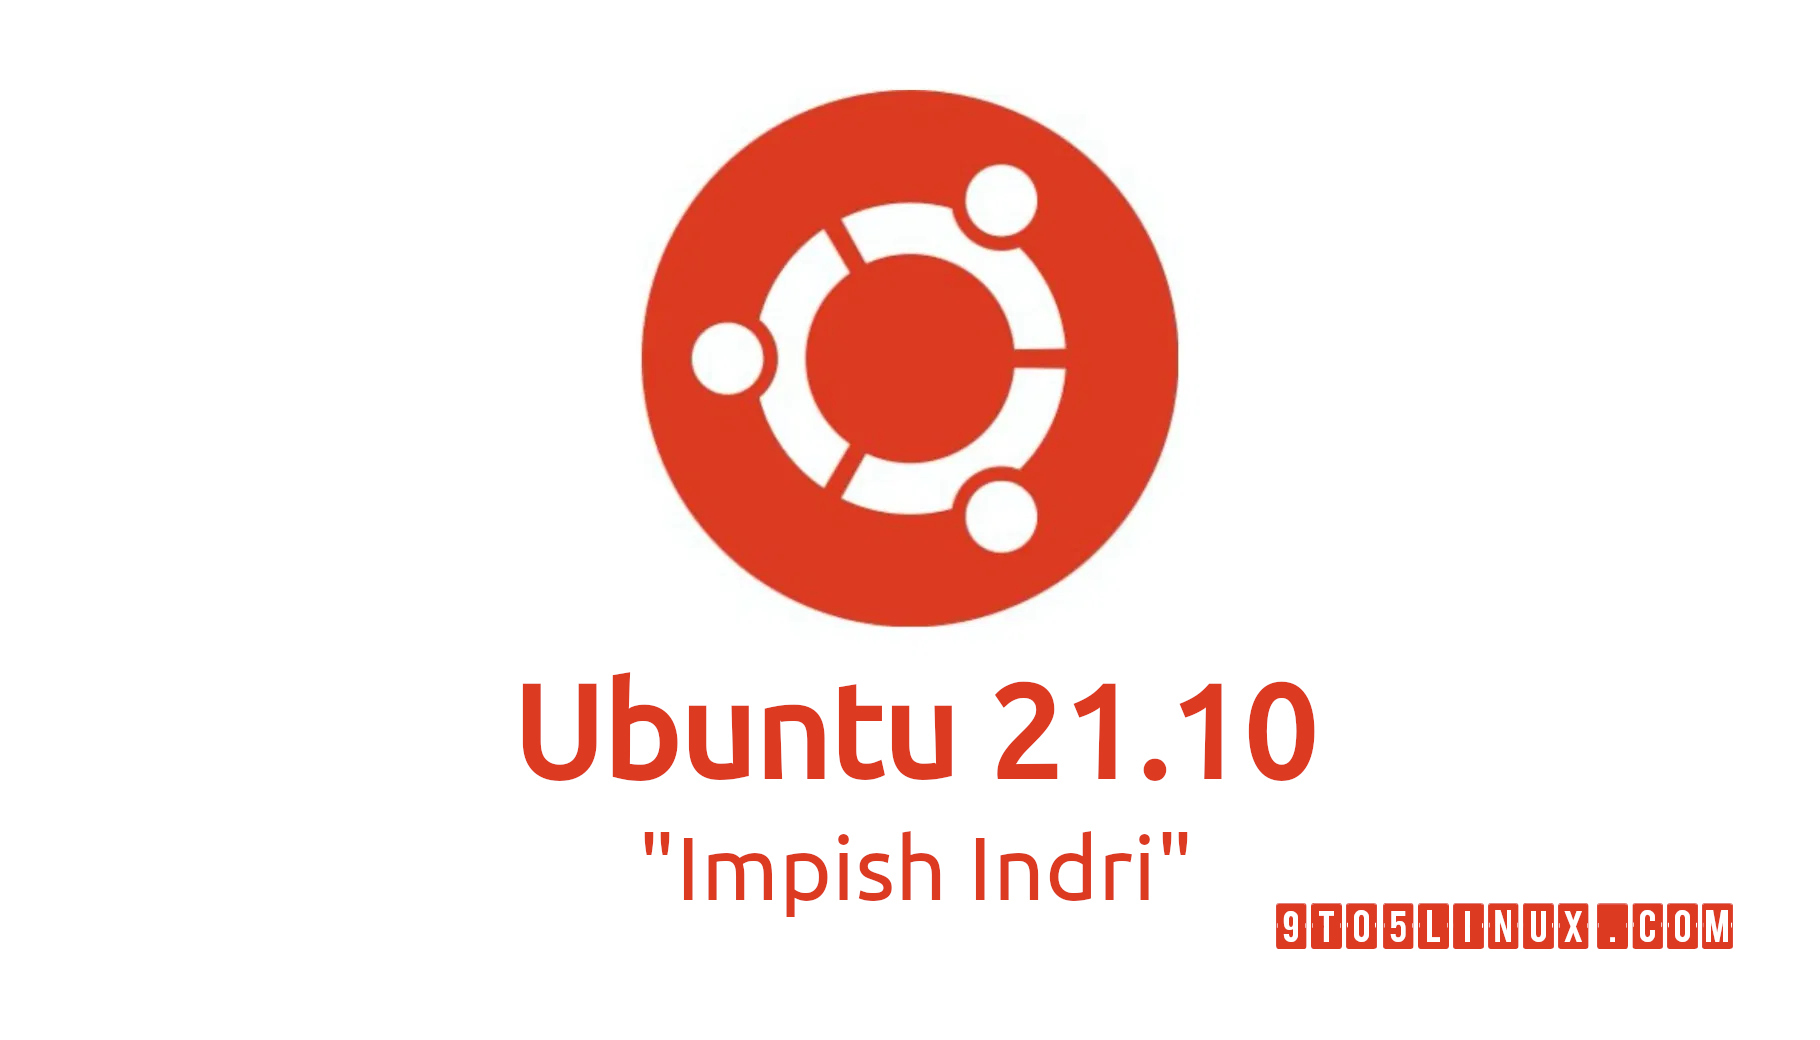 Ubuntu 21.10 (Impish Indri) Daily Builds Are Now Available to Download